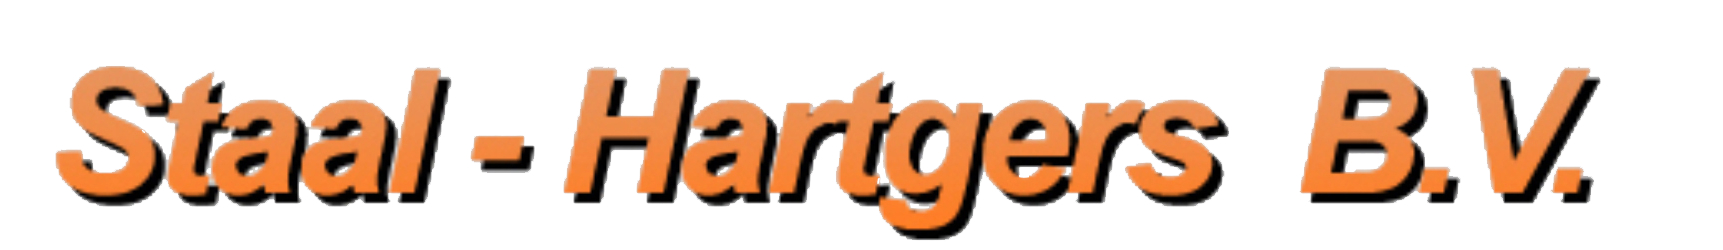 00285 logo Staal Hartgers